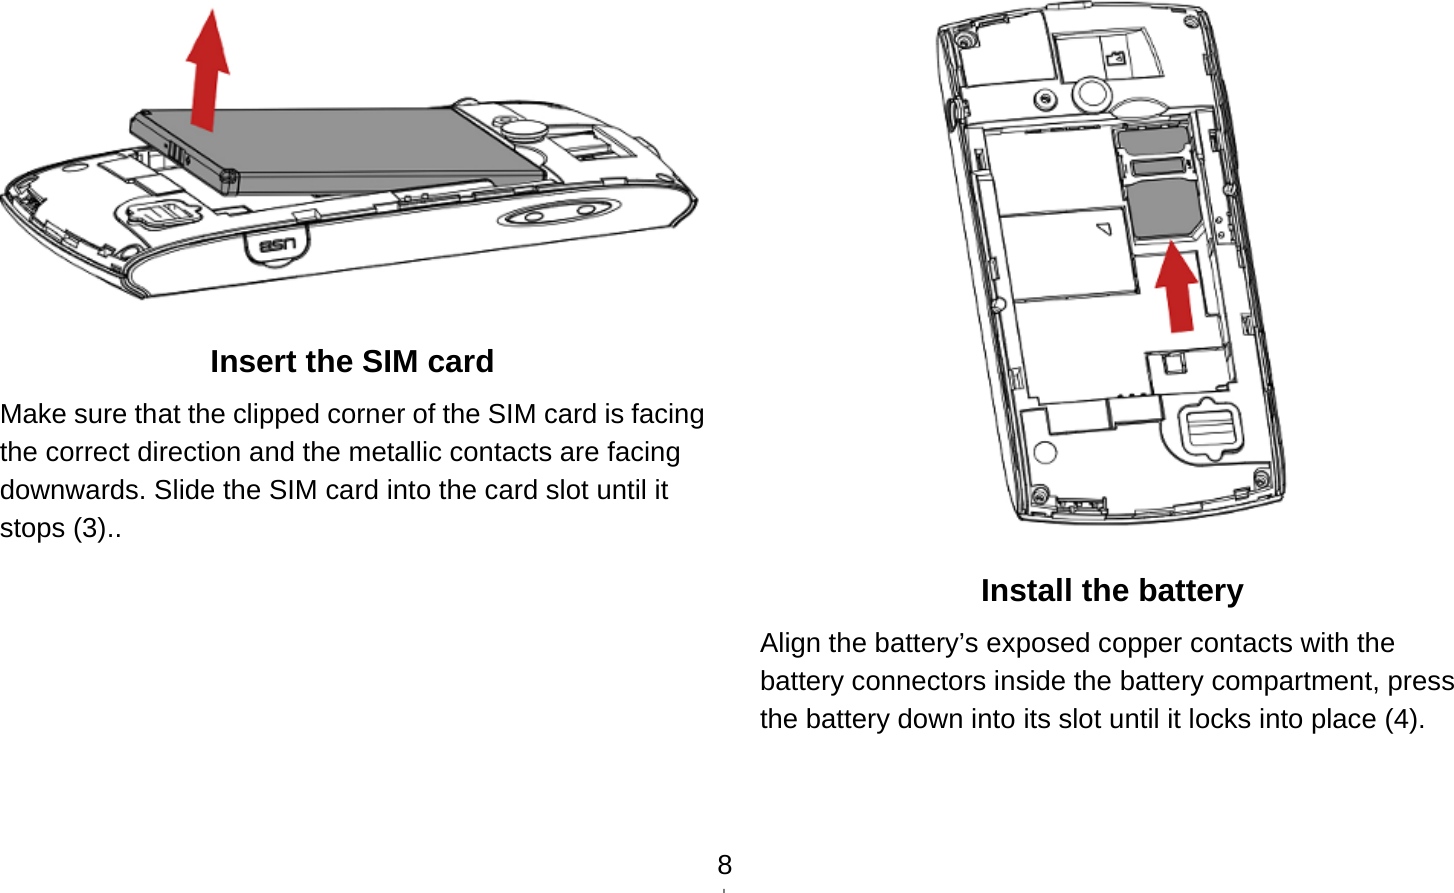   8 Insert the SIM card Make sure that the clipped corner of the SIM card is facing the correct direction and the metallic contacts are facing downwards. Slide the SIM card into the card slot until it stops (3)..   Install the battery Align the battery’s exposed copper contacts with the battery connectors inside the battery compartment, press the battery down into its slot until it locks into place (4). 